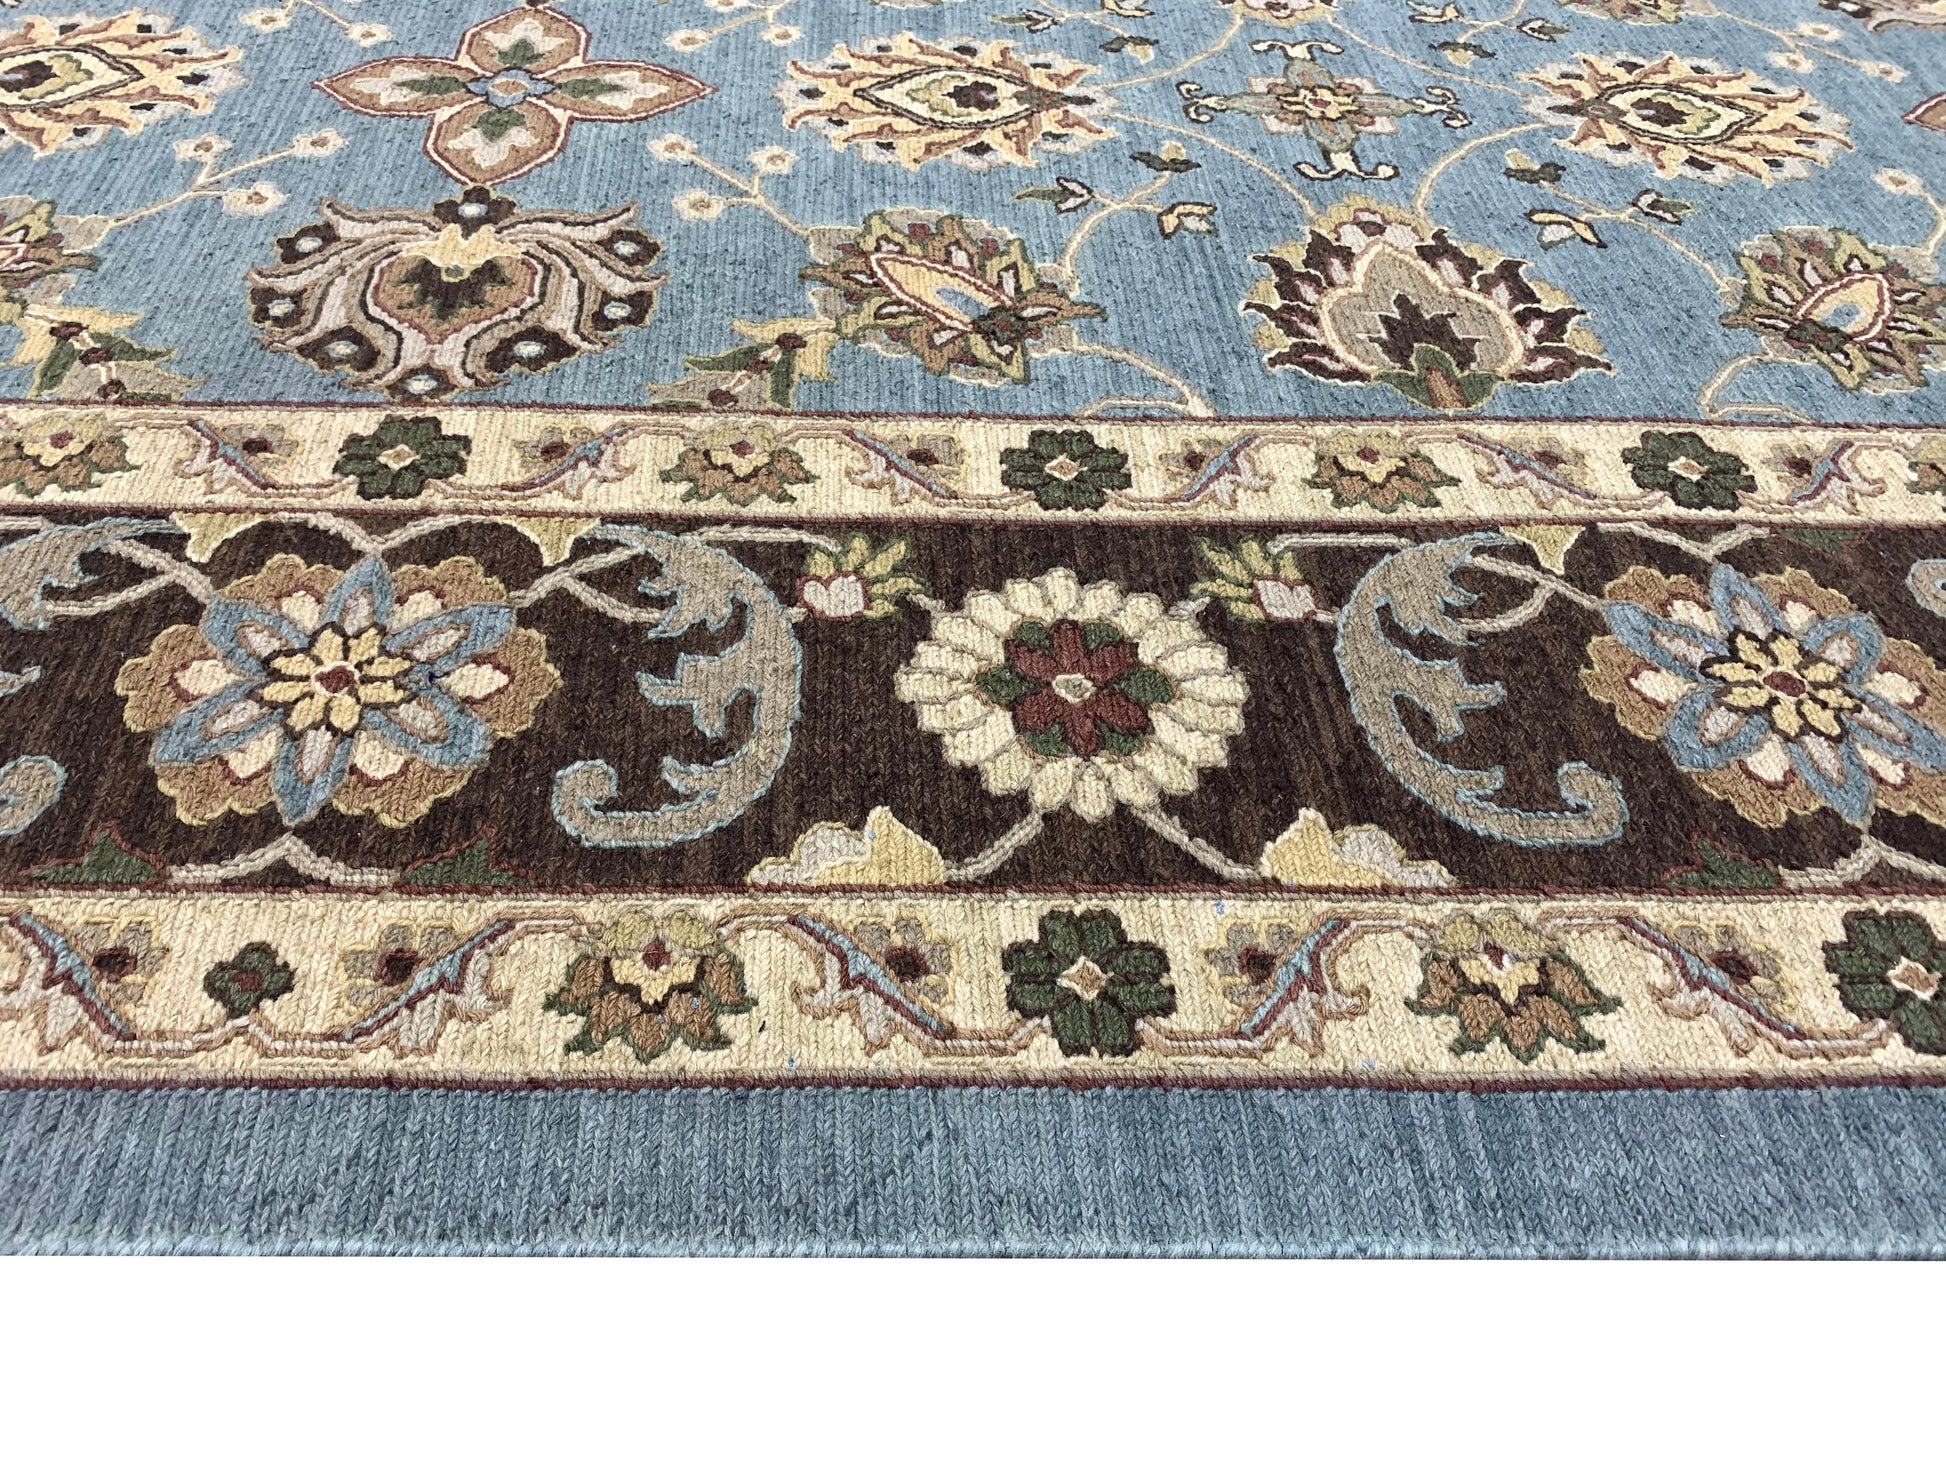 Get trendy with L.Blue Pure Wool Traditional Soumak Area Rug 8.2x10.2ft 248x310Cms - Traditional Rugs available at Jaipur Oriental Rugs. Grab yours for $830.00 today!